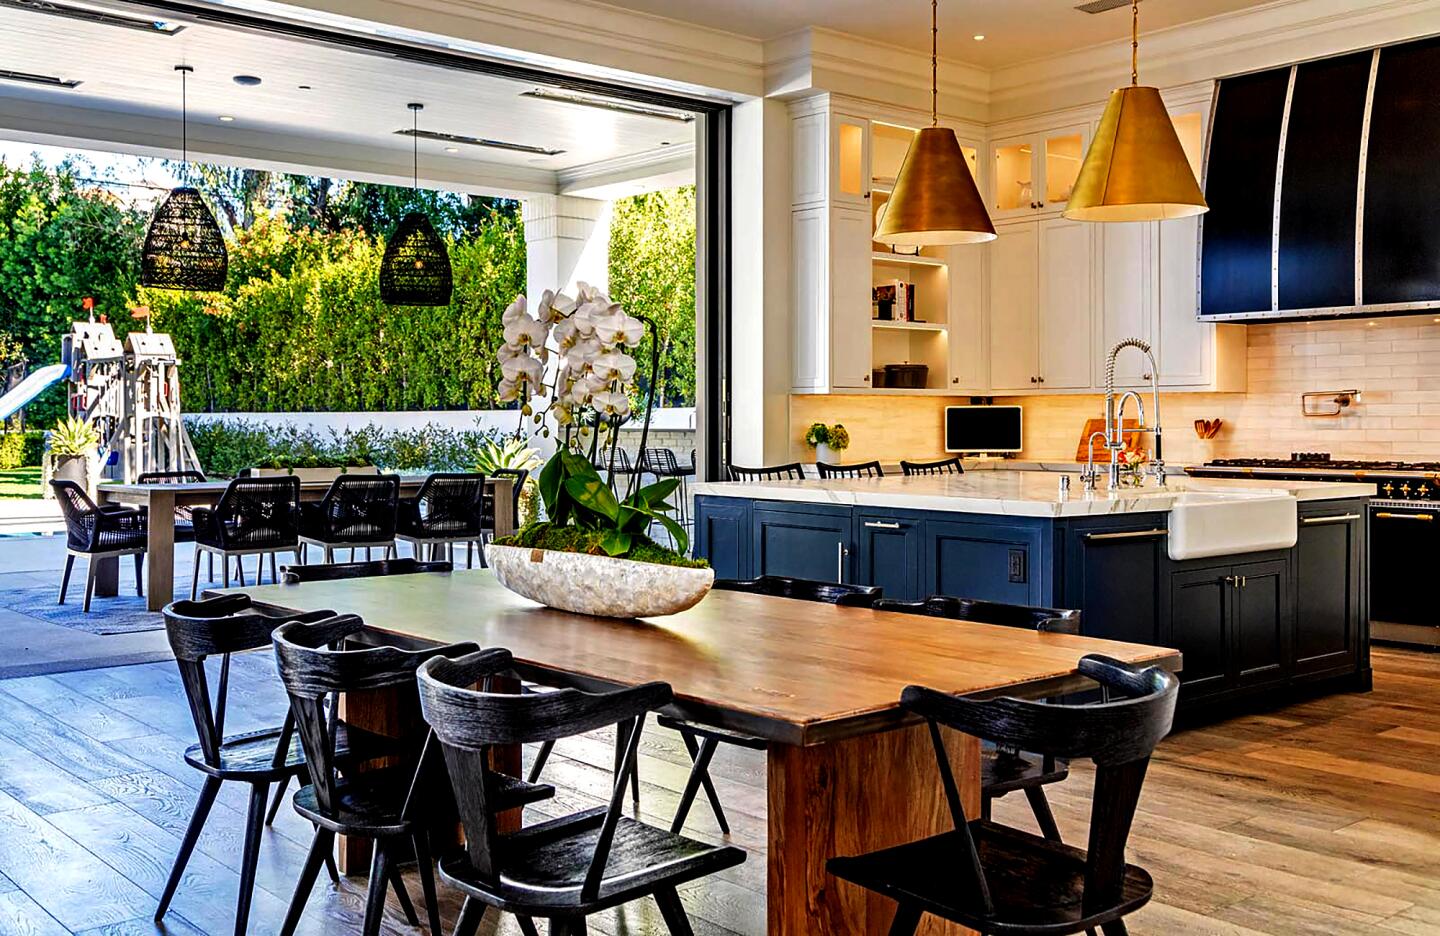 The kitchen with appliances, a dining set, an island and chairs overlooking an outdoor dining set and landscaping.